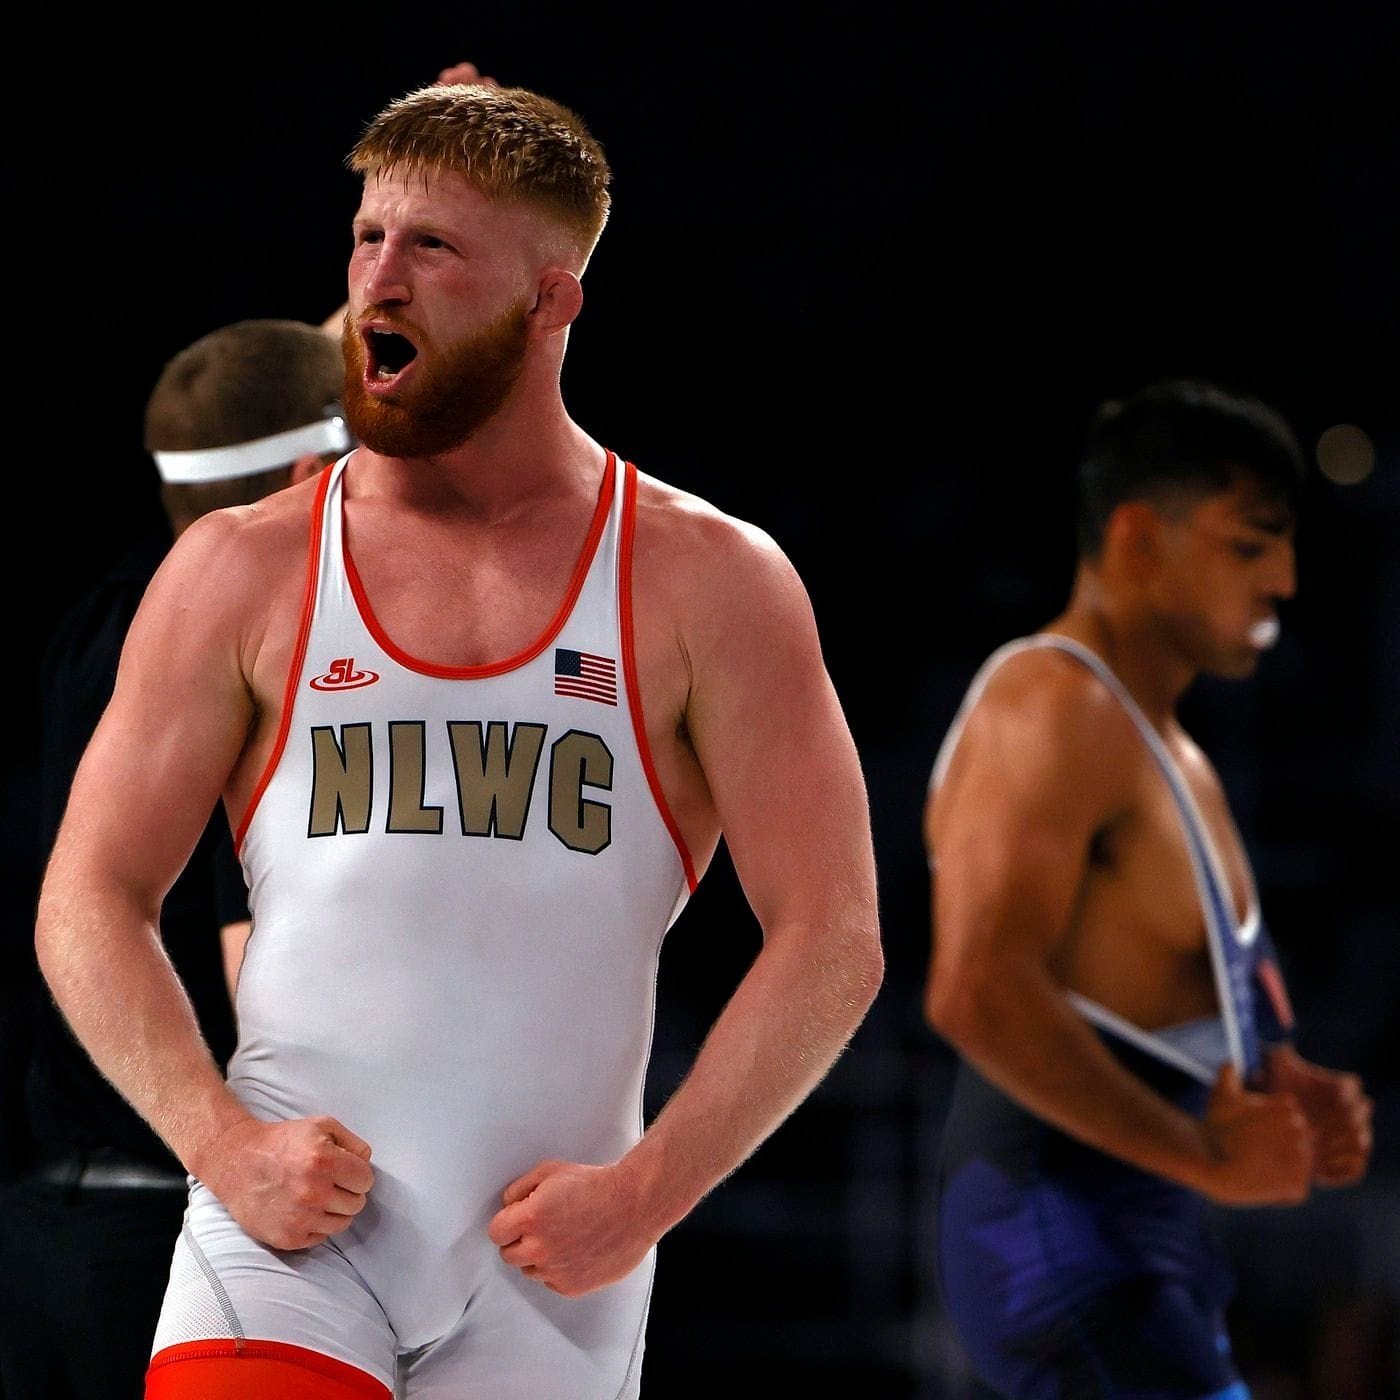 Watch the Photo by DirtyDaddyFunStuff with the username @DirtyDaddyPorn, who is a verified user, posted on February 5, 2024 and the text says '#gingers #bigears #wrestling #uniforms #sports #jocks'